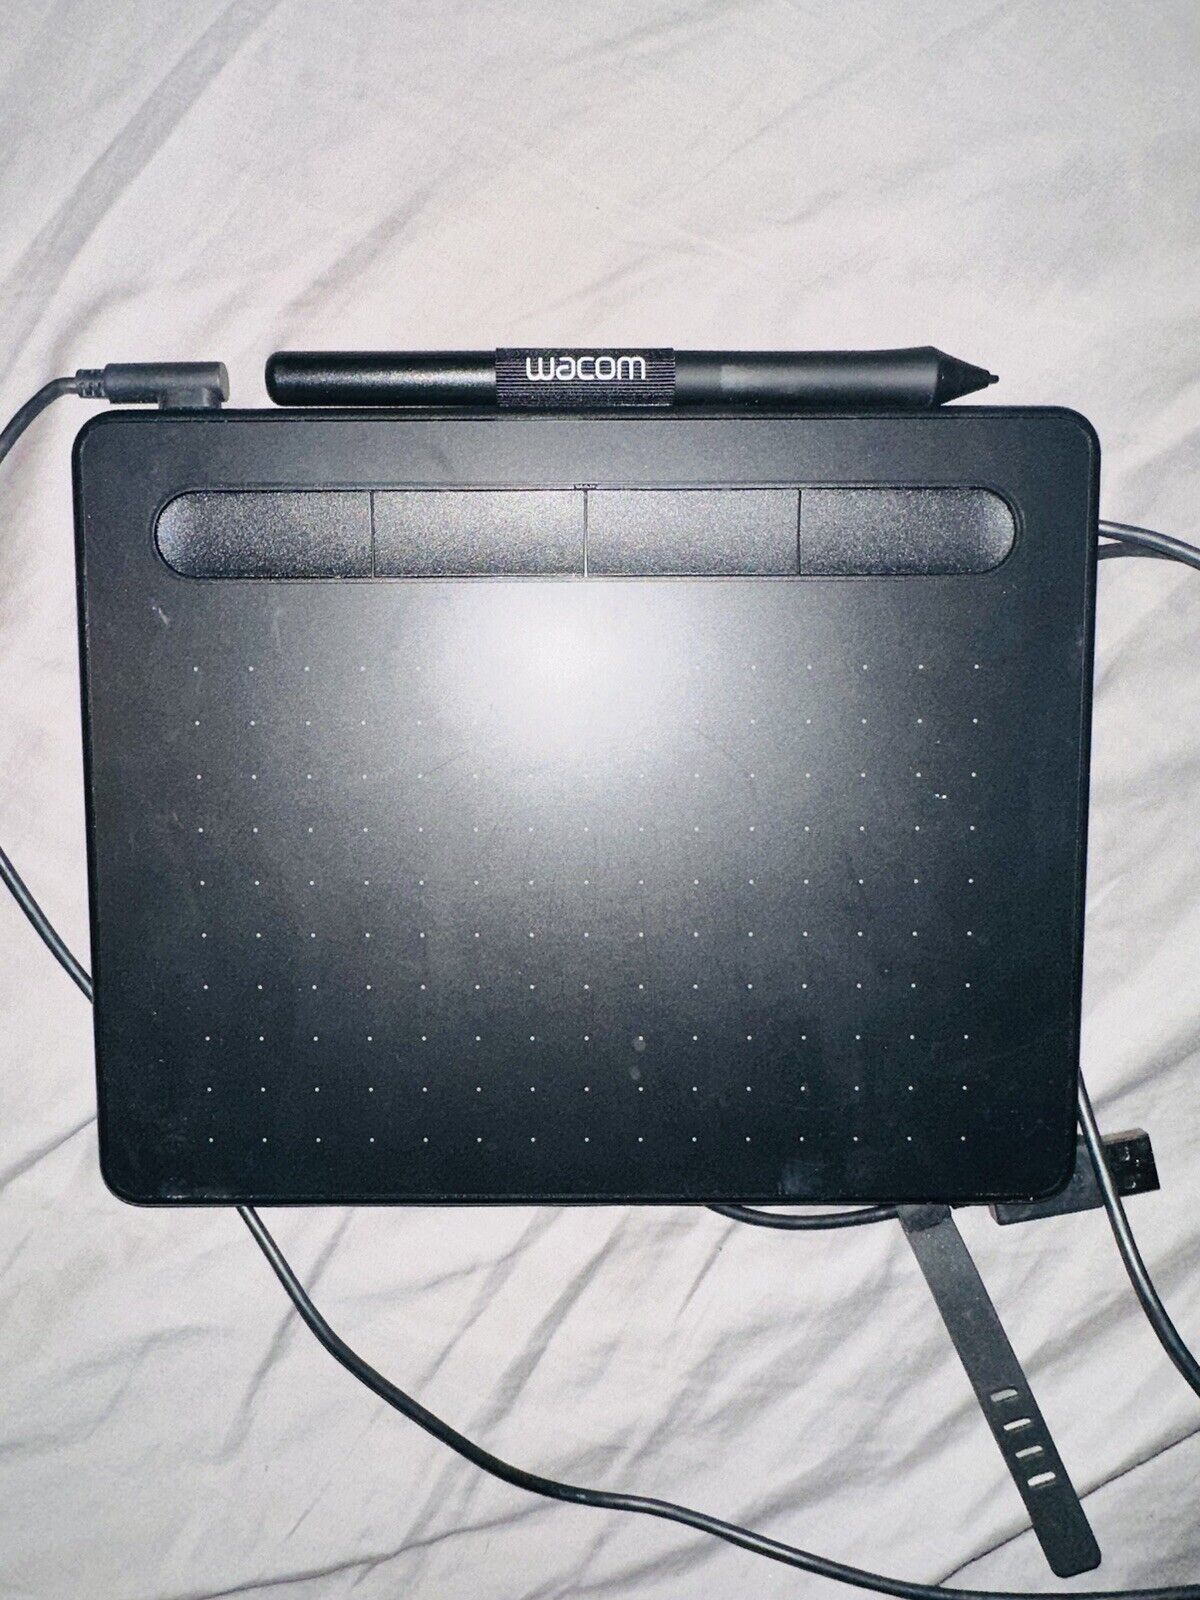 Wacom Intuos S Wireless Drawing Graphics Tablet - Black